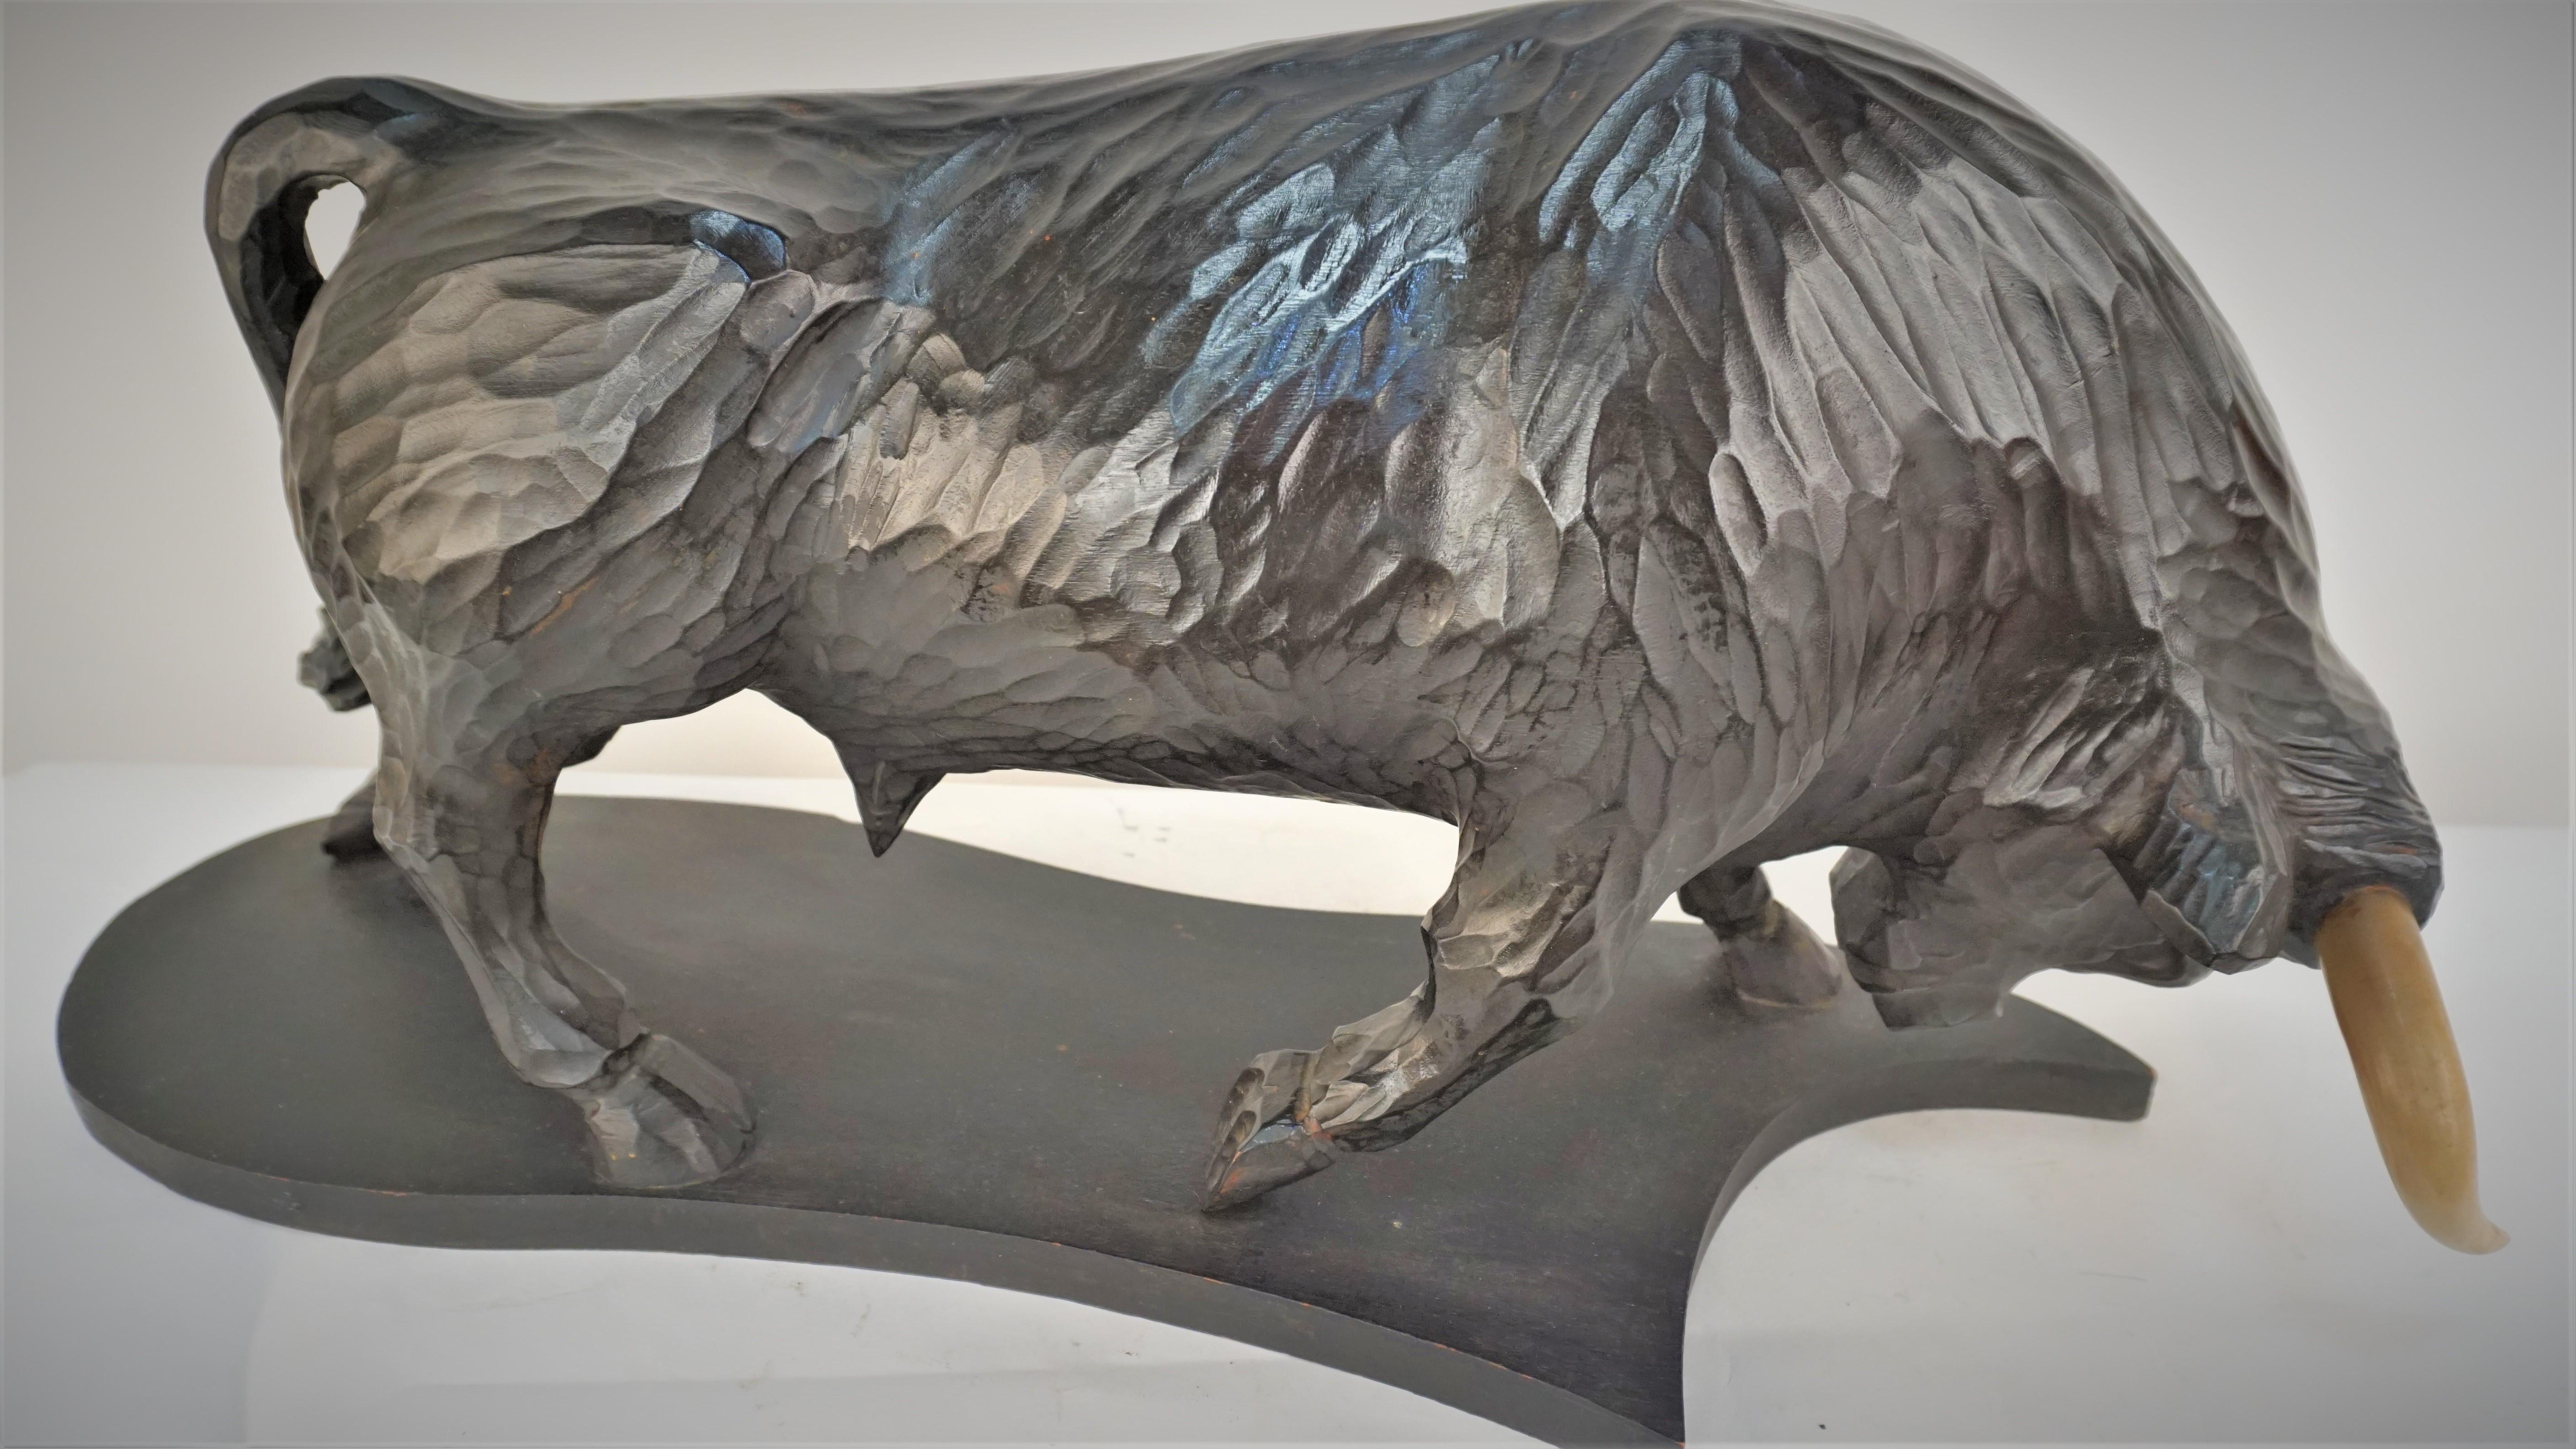 Bone Jose Pinal, Large Carved Wood Sculpture of a Bull 